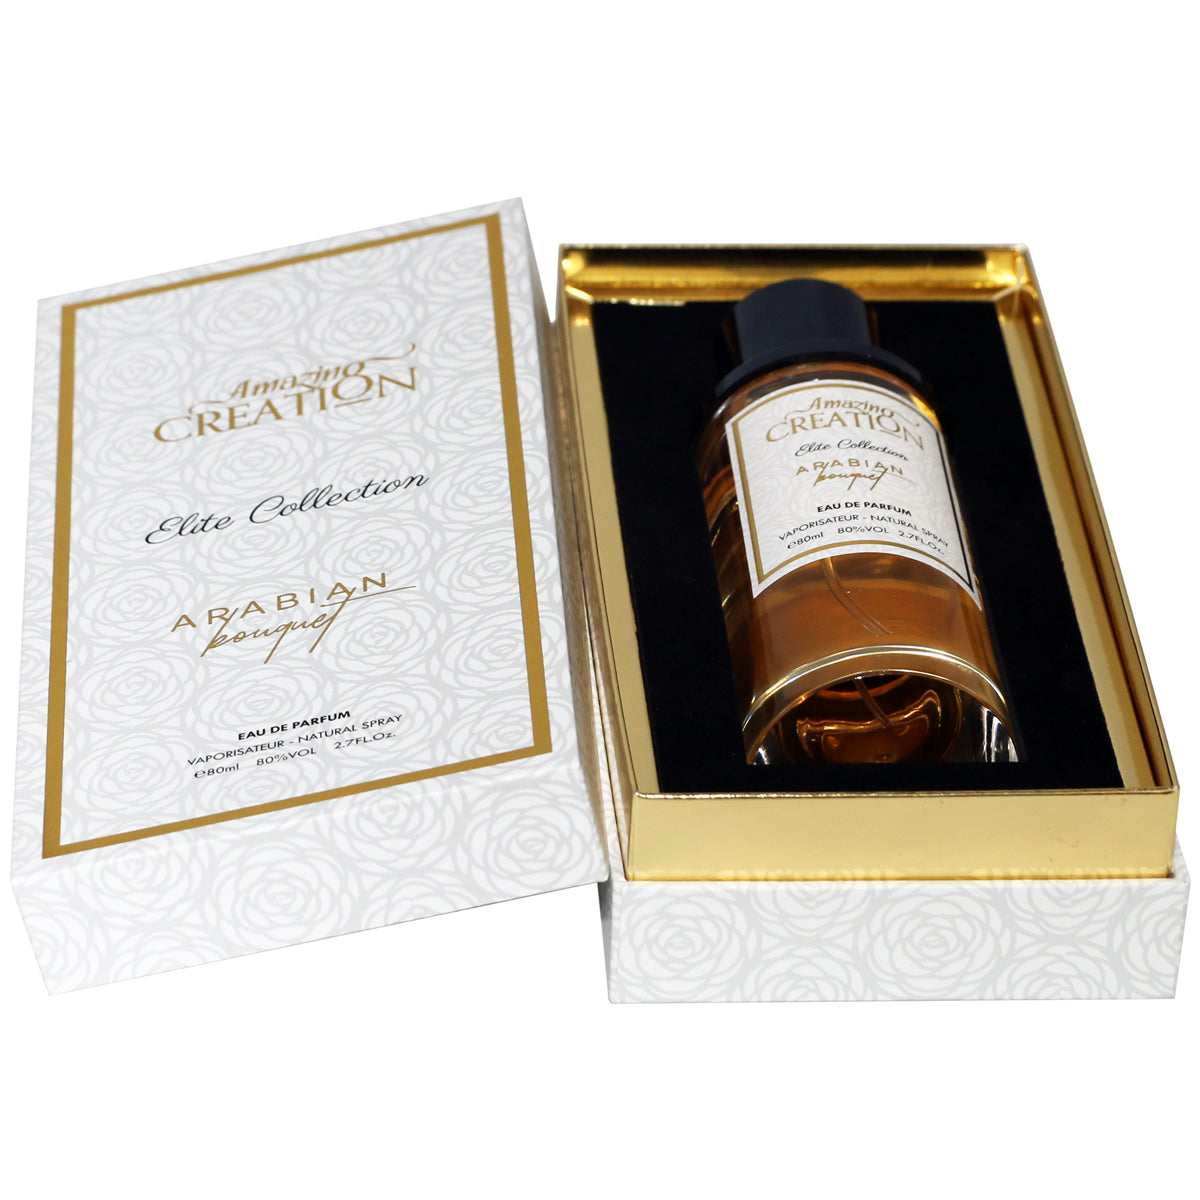 Arabian Bouquet, Perfume for Unisex by Amazing creation Elite Collection, EDP, 80ml